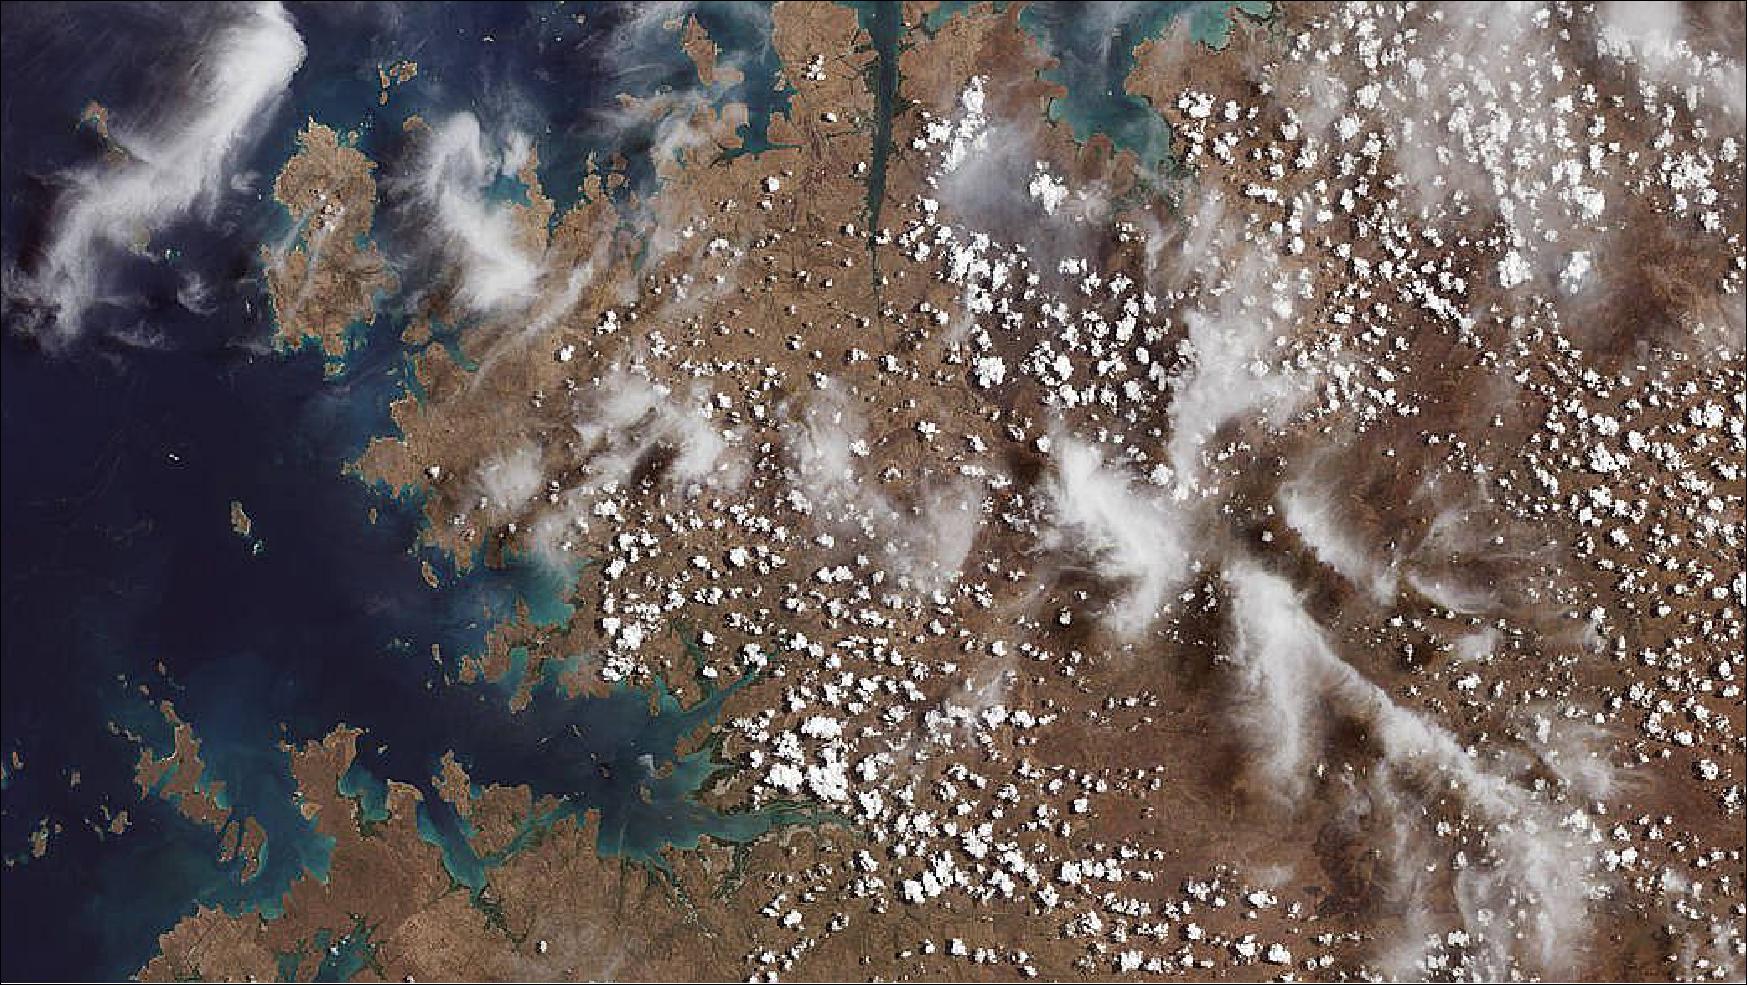 Figure 48: The first image collected by Landsat-9, on Oct. 31, 2021, shows remote coastal islands and inlets of the Kimberly region of Western Australia. In the top middle section of the image, the Mitchell River carves through sandstone, while to the left Bigge Island and the Coronation Islands stand out in the Indian Ocean. Australia is a major international partner of the Landsat-9 program, and operates one of the Landsat Ground Network stations in Alice Springs (image credit: NASA/USGS, Michael Bock)